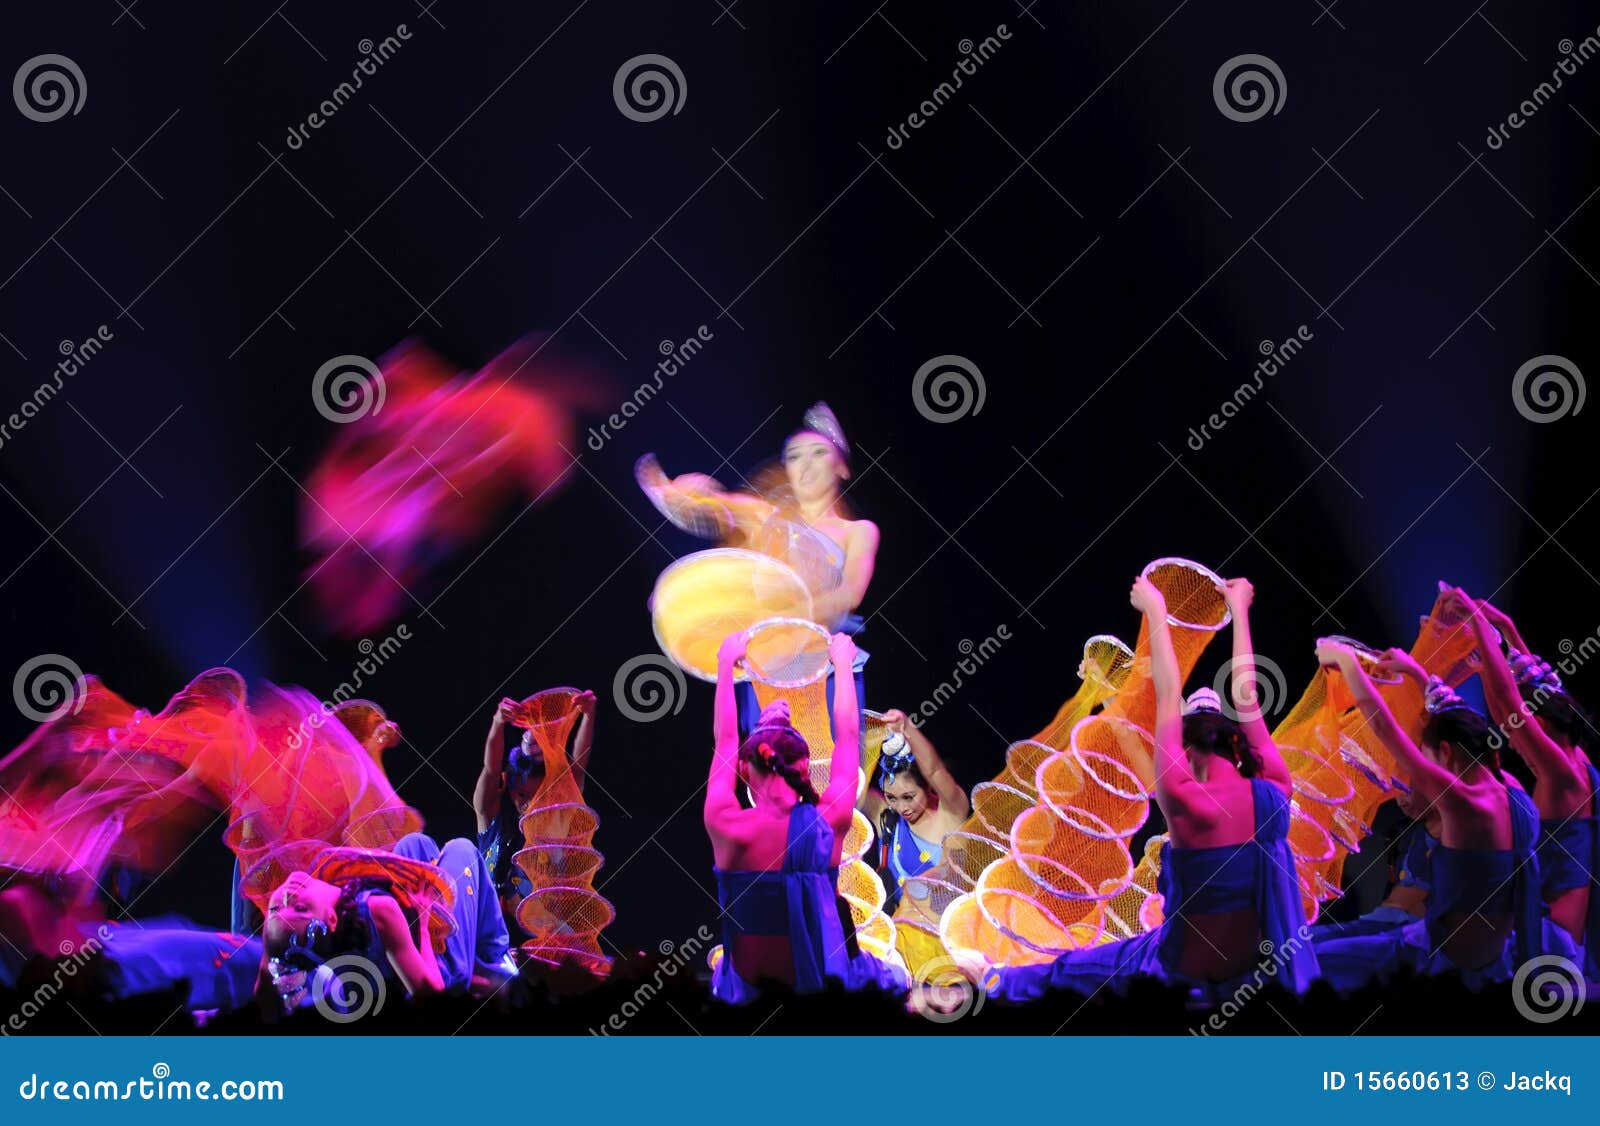 Chinese folk dancer editorial stock photo. Image of fitness - 15660613